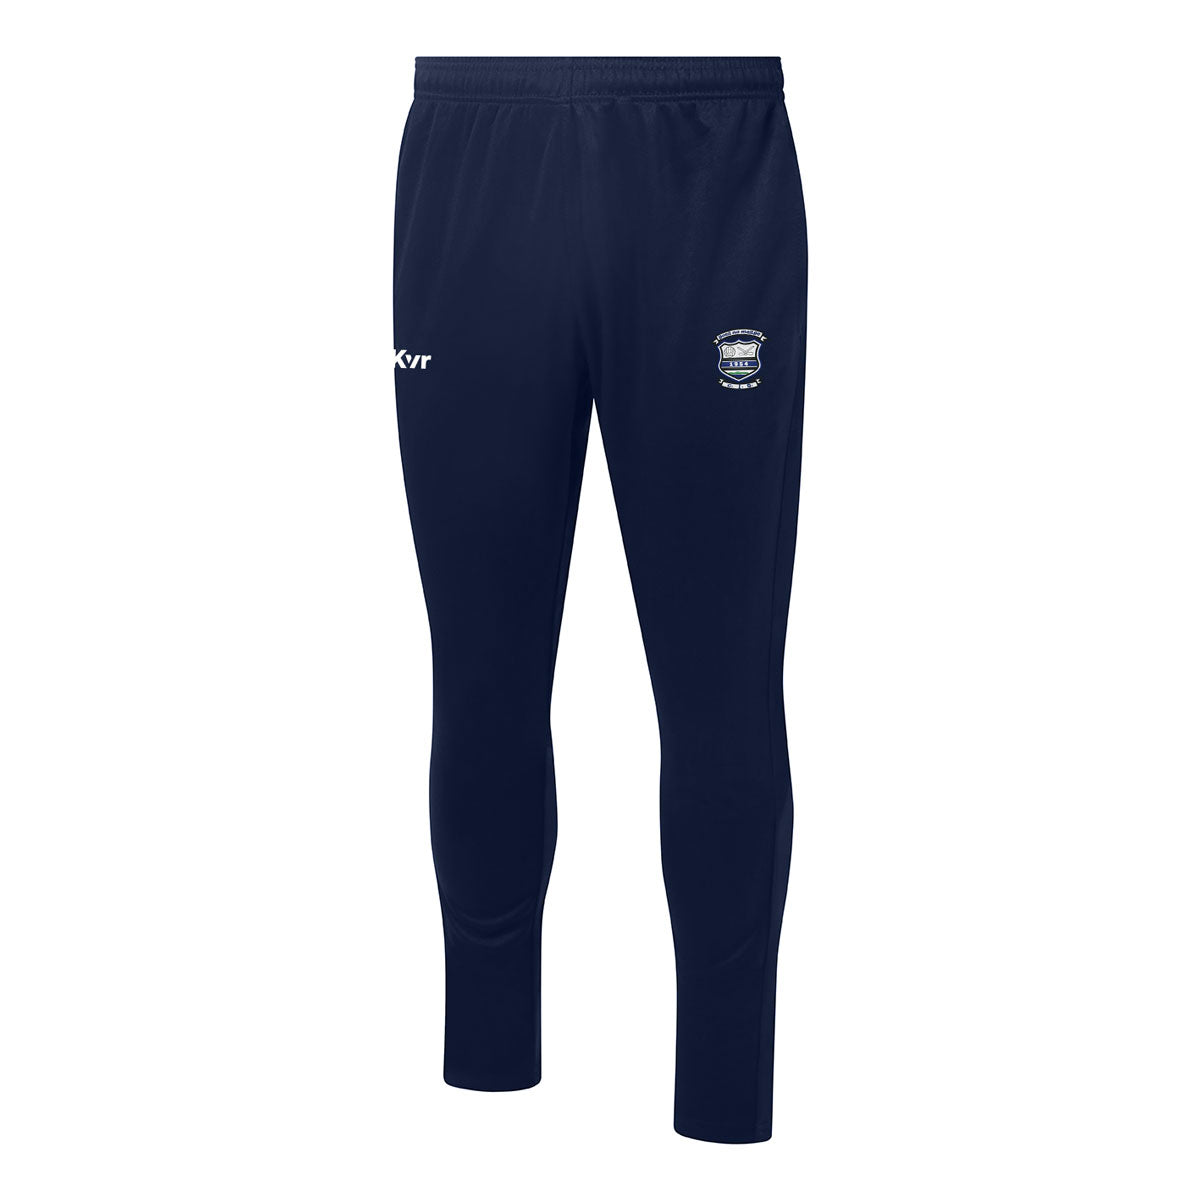 Mc Keever Melvin Gaels Core 22 Skinny Pants - Youth - Navy